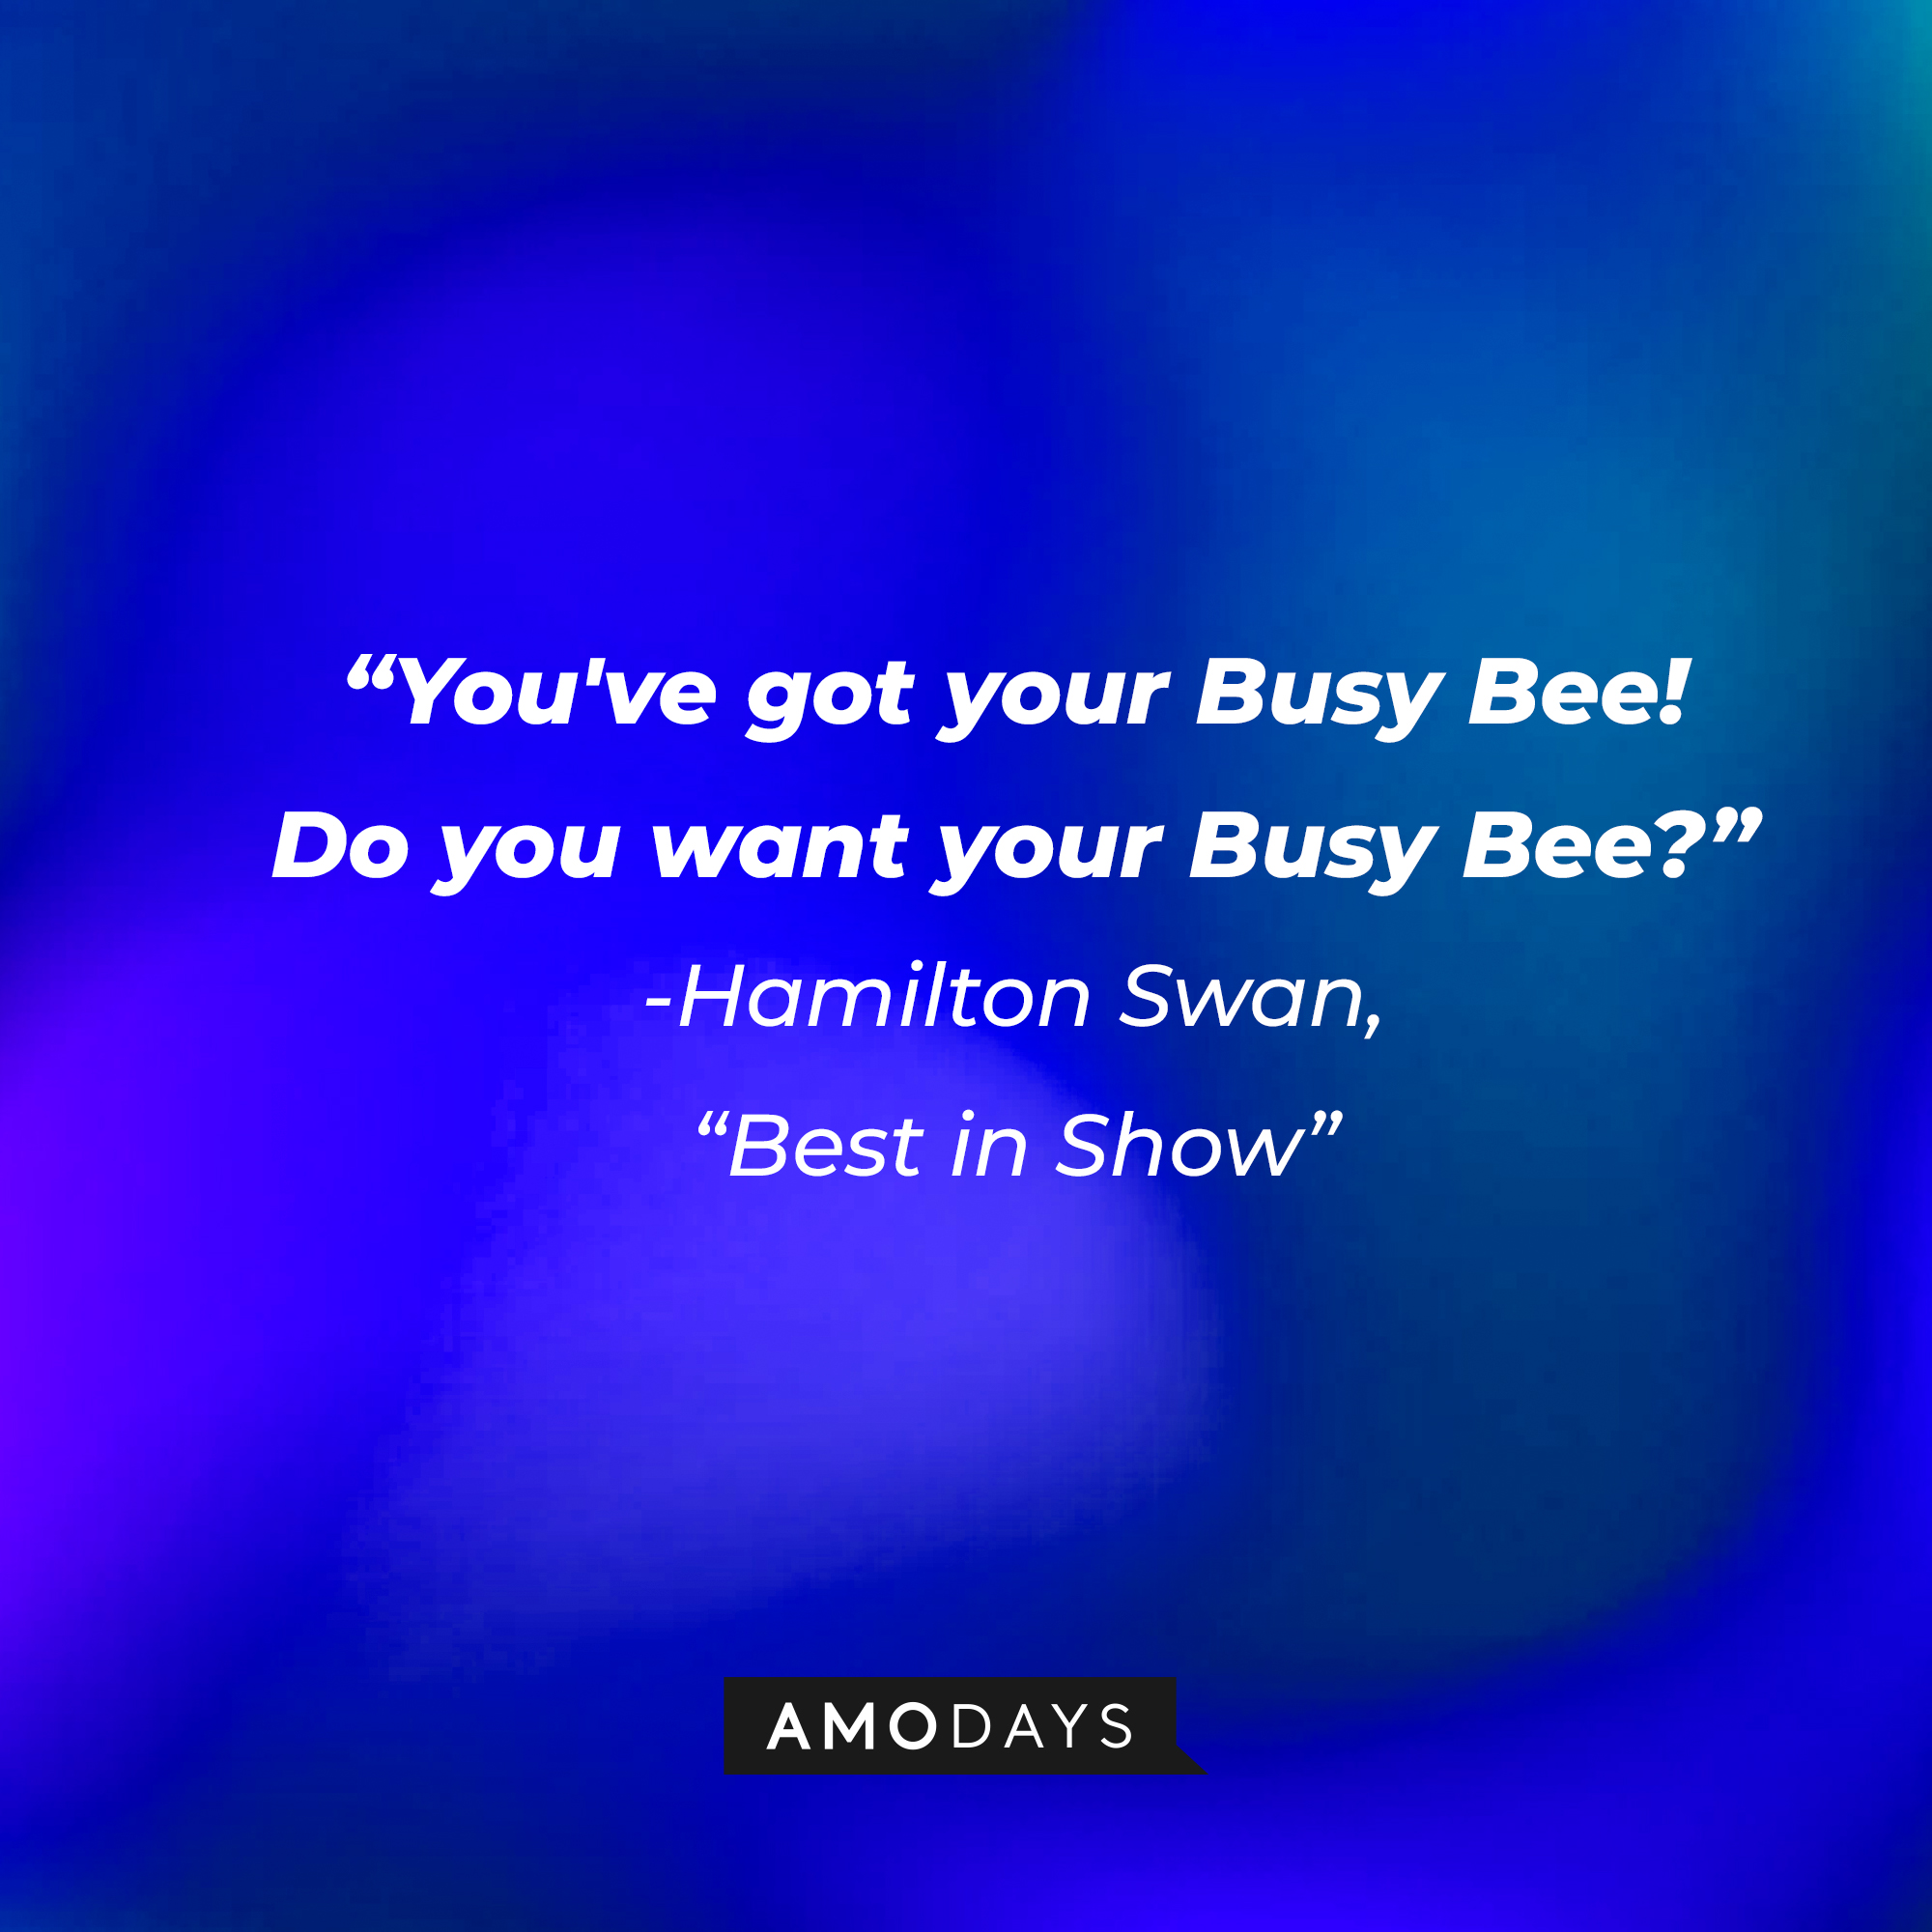 Hamilton Swan's quote in "Best in Show:" "You've got your Busy Bee! Do you want your Busy Bee?" | Source: AmoDays